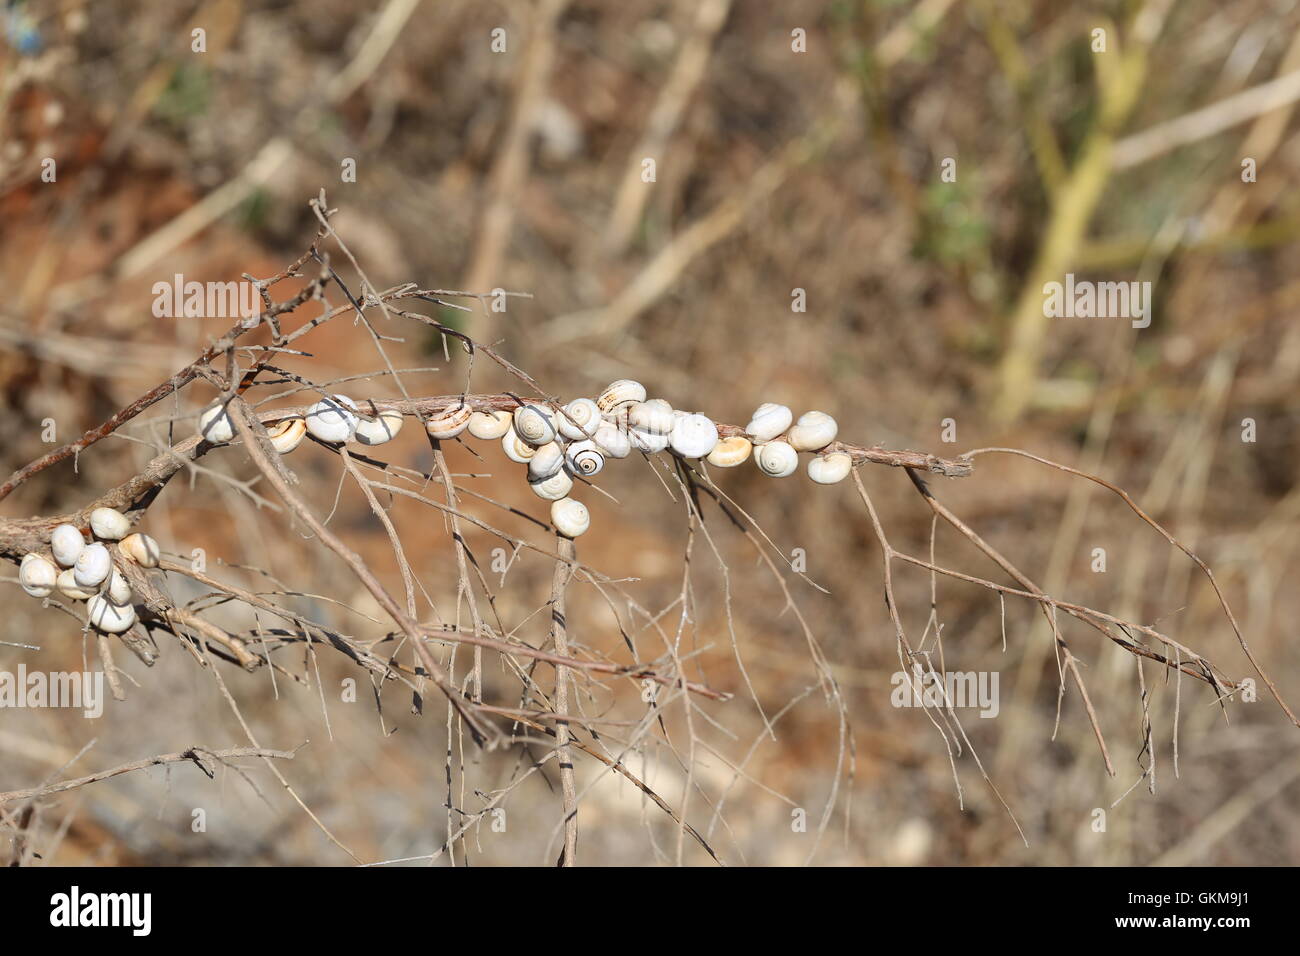 Snails Sticking to a Stalk. Group of white garden snails (also called Mediterranean coastal snail) attaching to a dry stalk, colony of land snails on Stock Photo